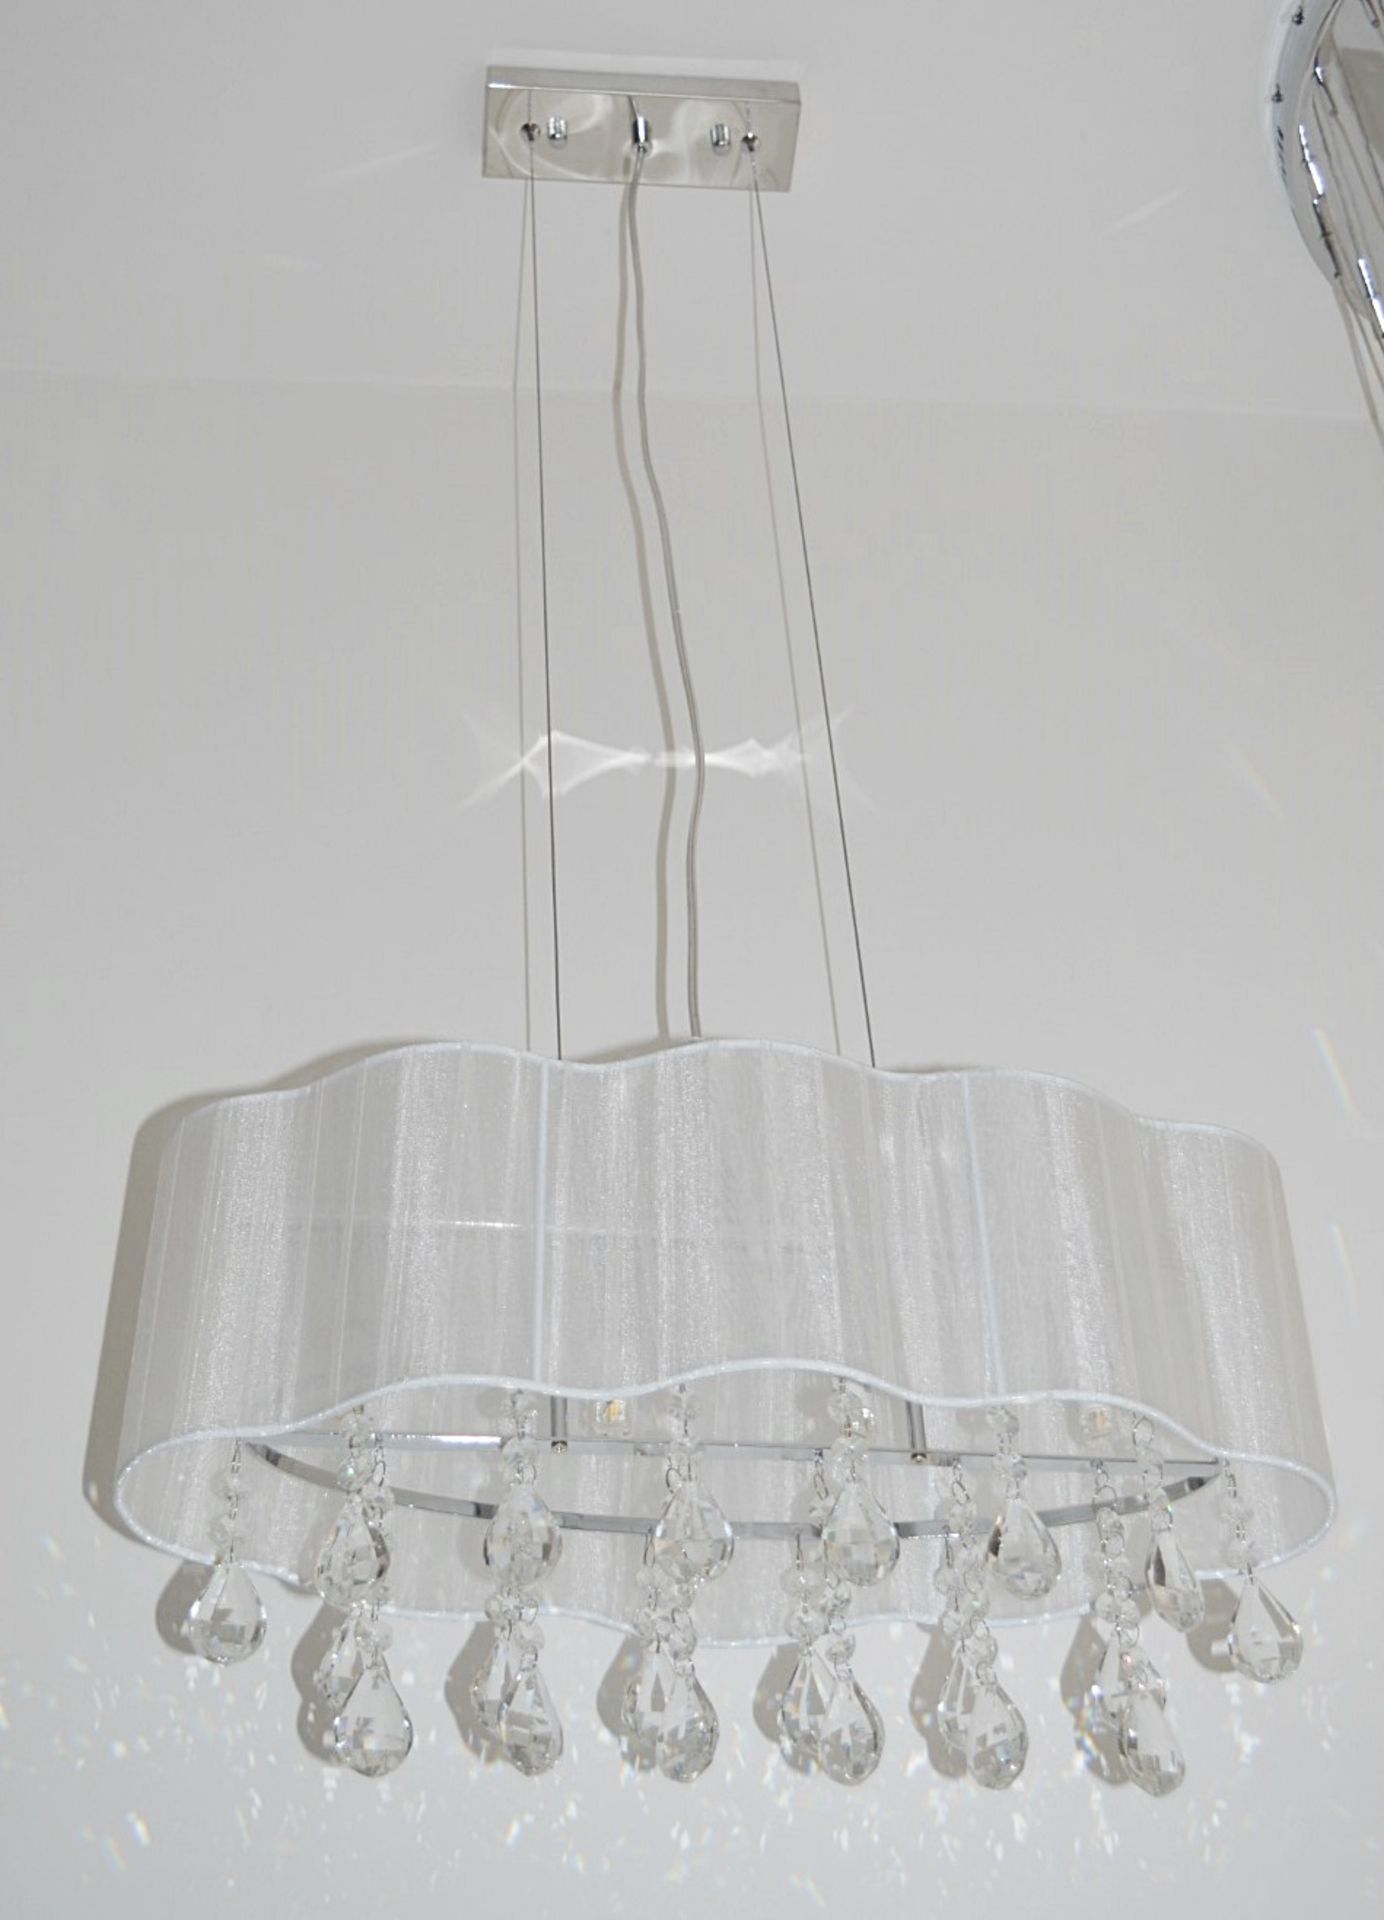 1 x Large Pleated 4-Light Ceiling Light With A Cream Voile Shade - RRP £147.84 - Image 2 of 3